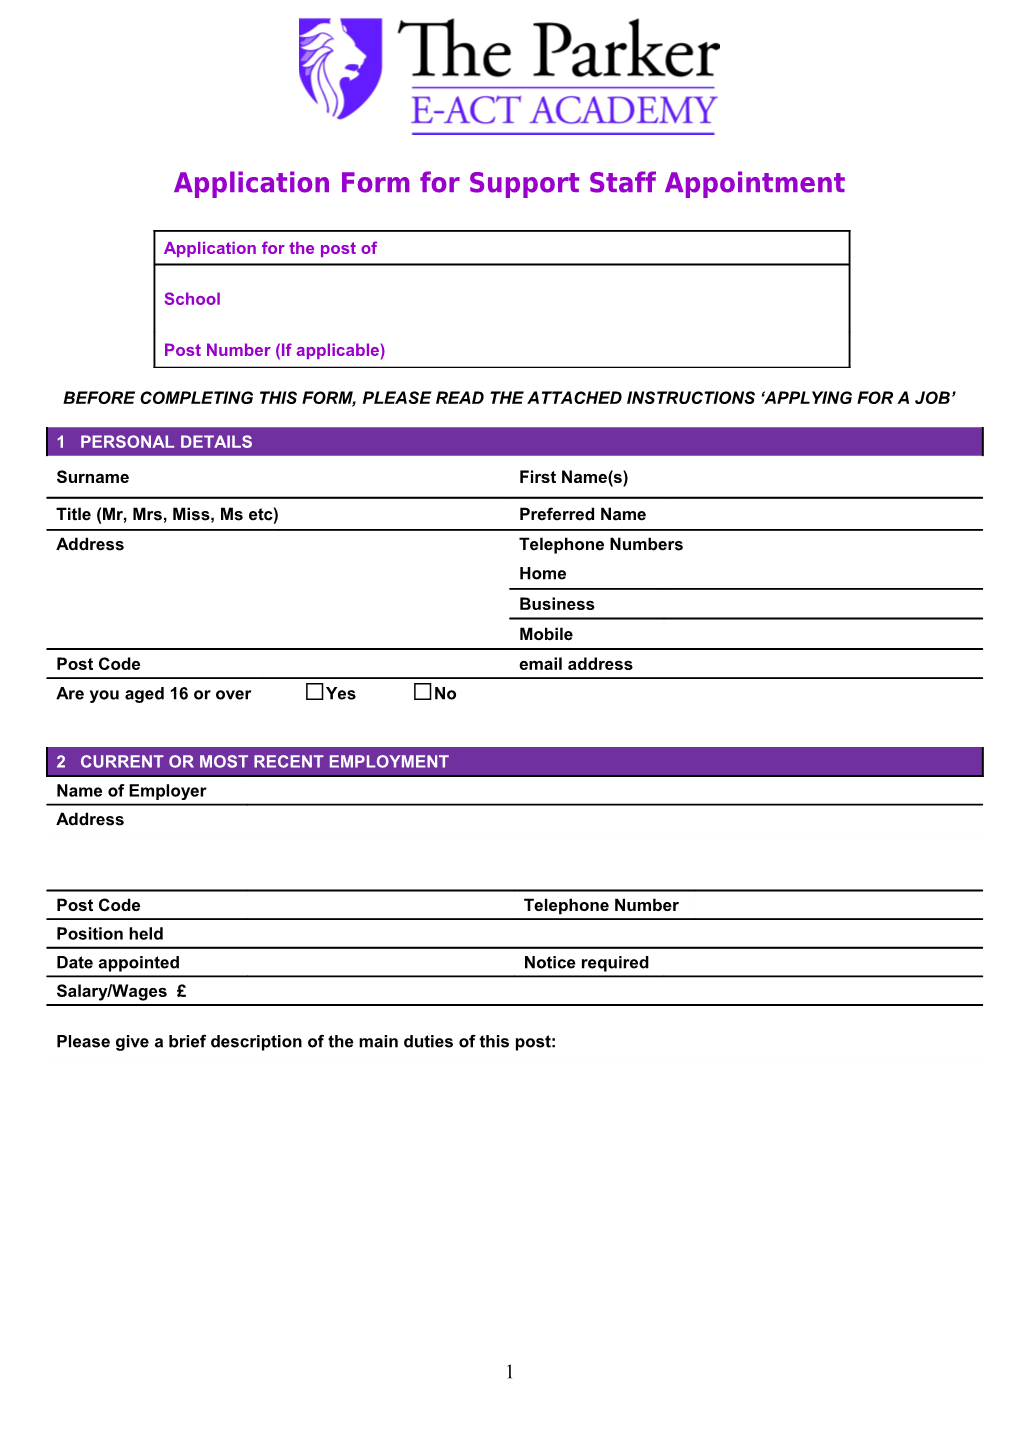 Application Form for Support Staff Appointment